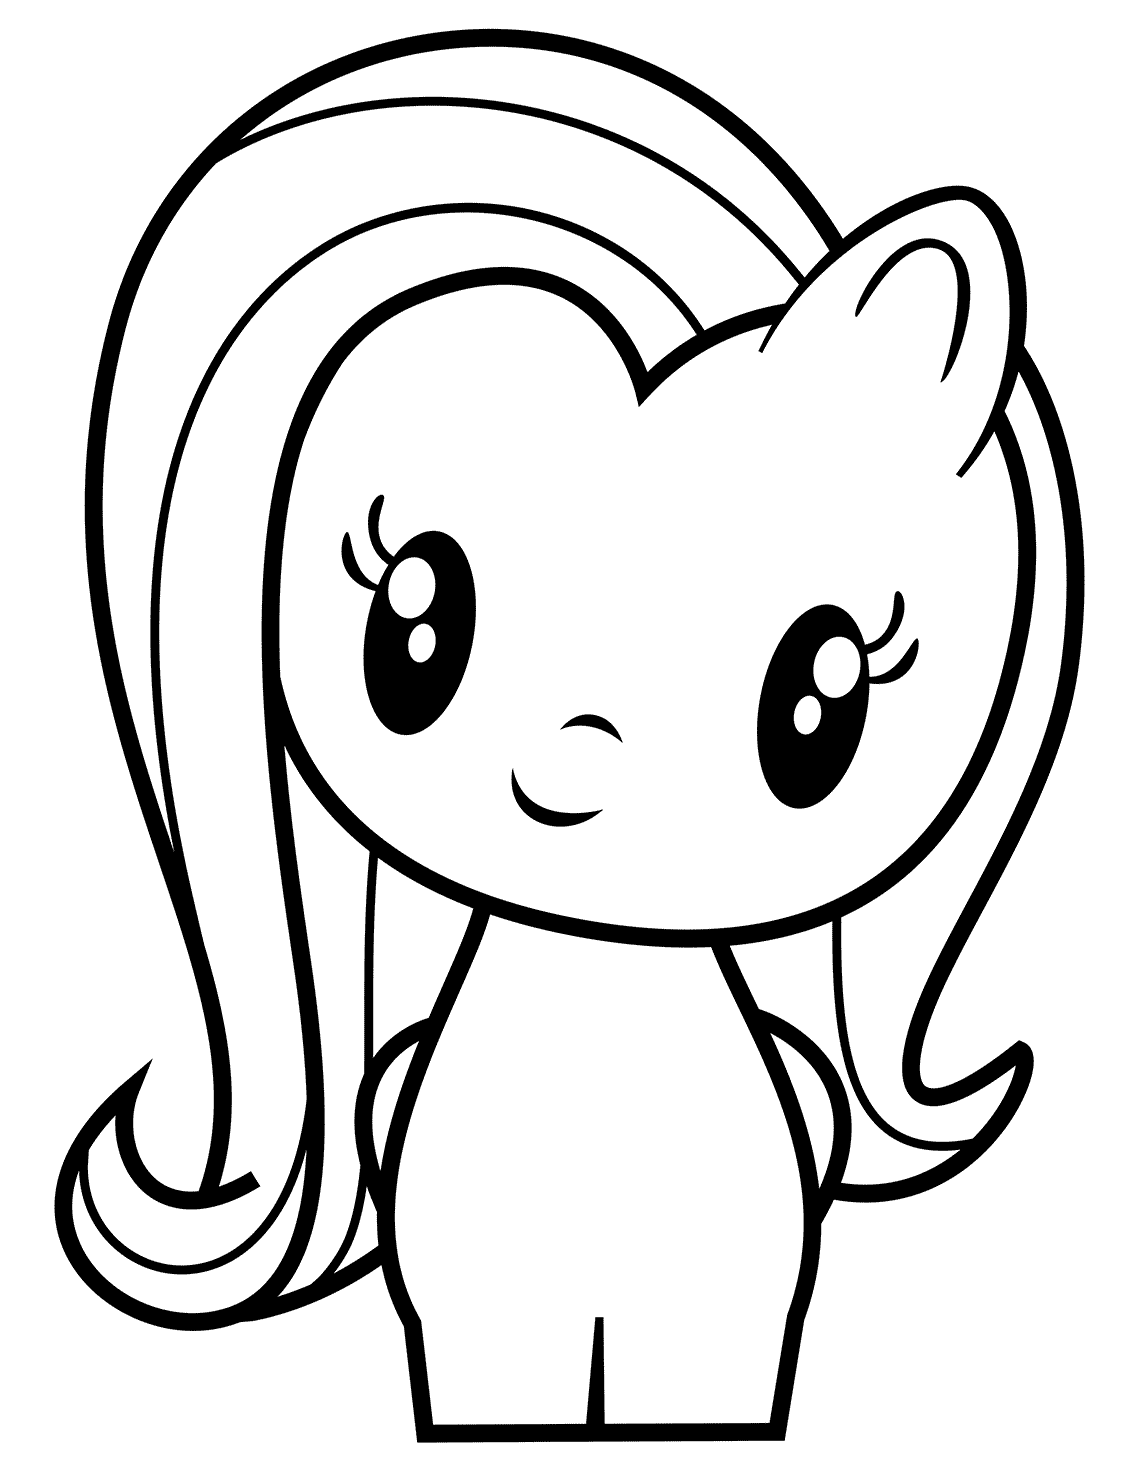 Pony Fluttershy Coloring Pages   Coloring Cool